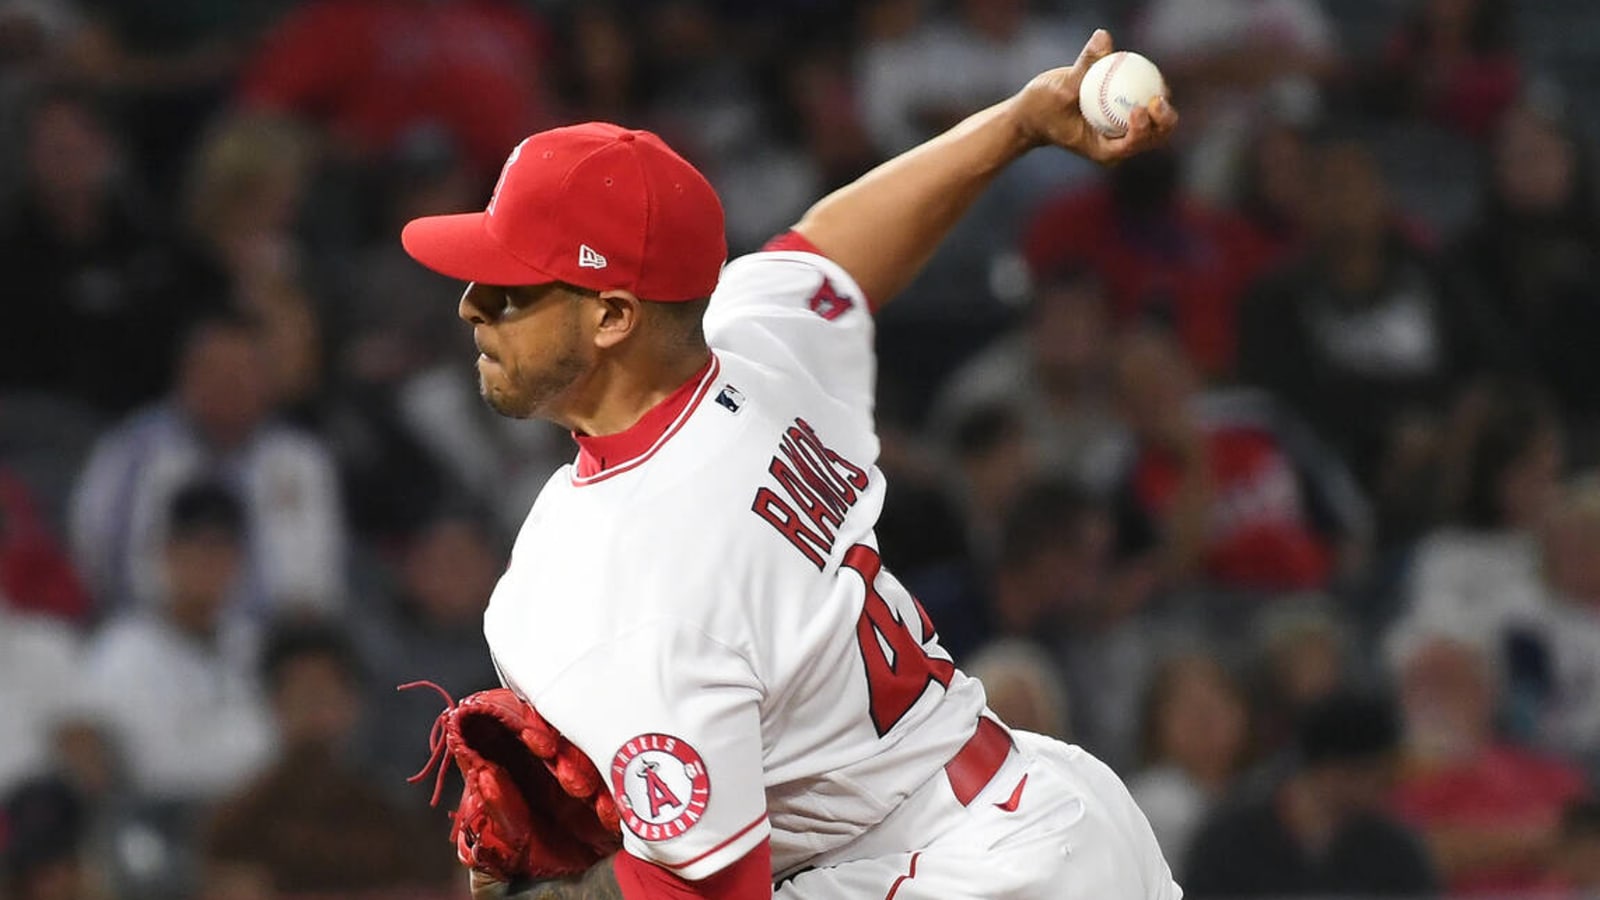 Angels re-sign AJ Ramos to minors deal